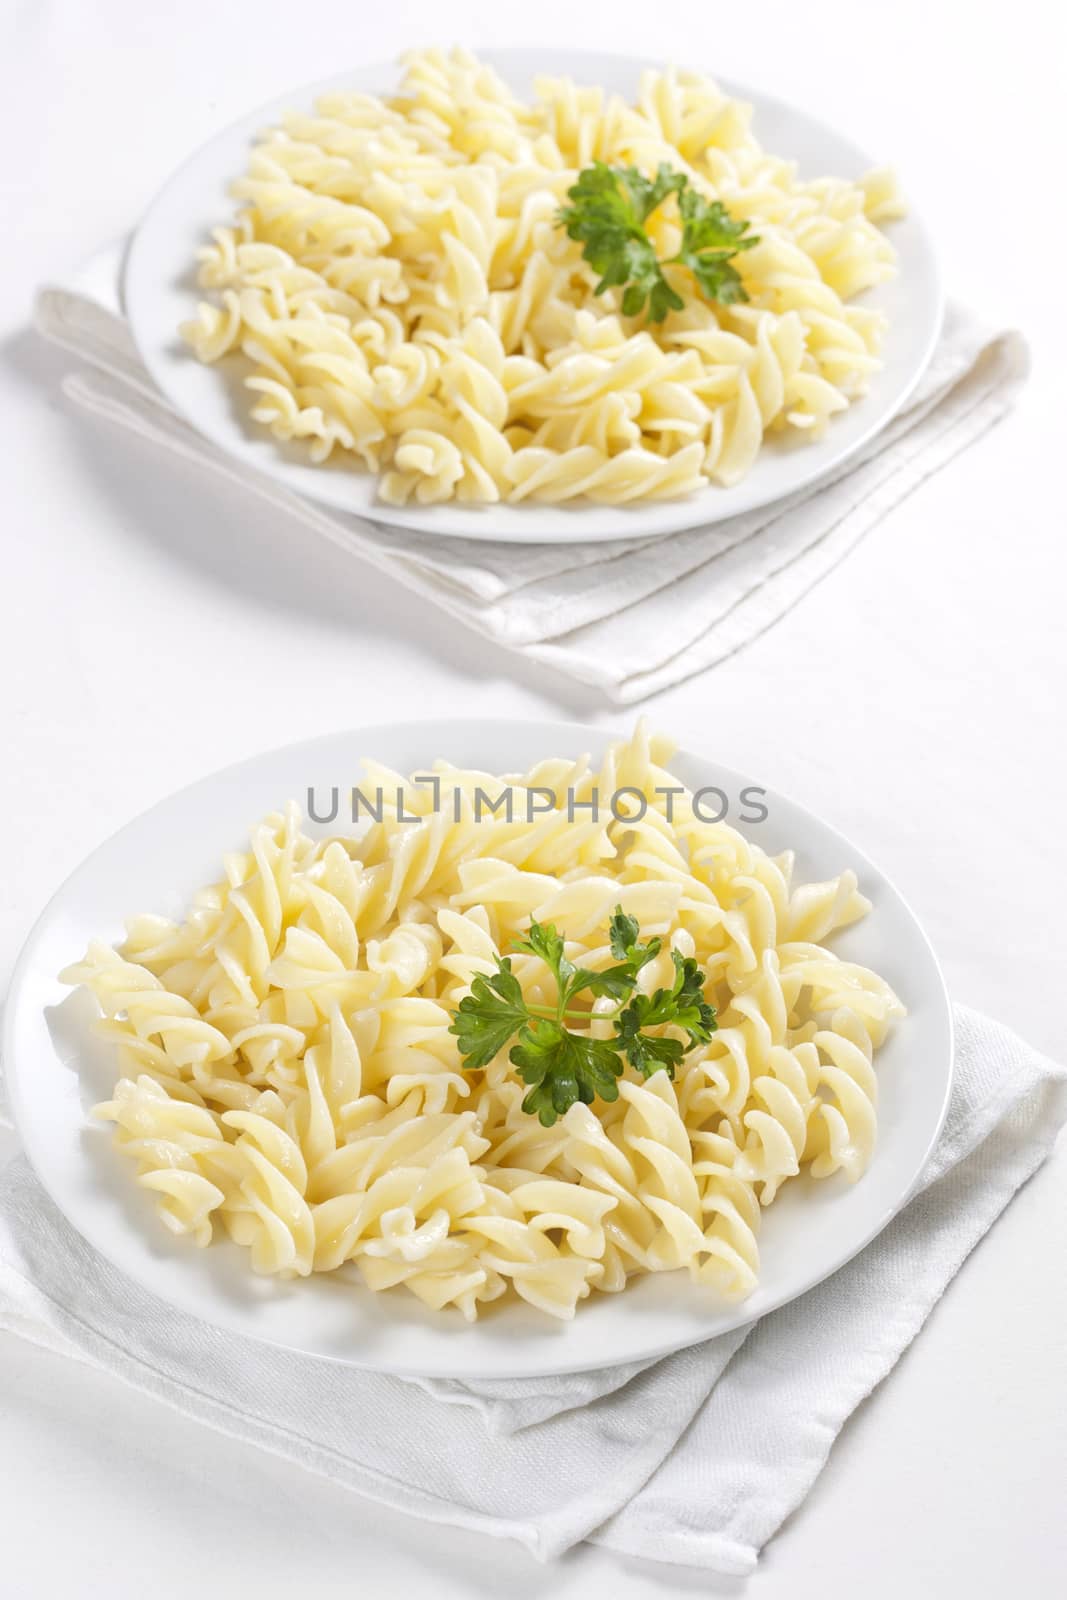 Two plates of pasta with parsley